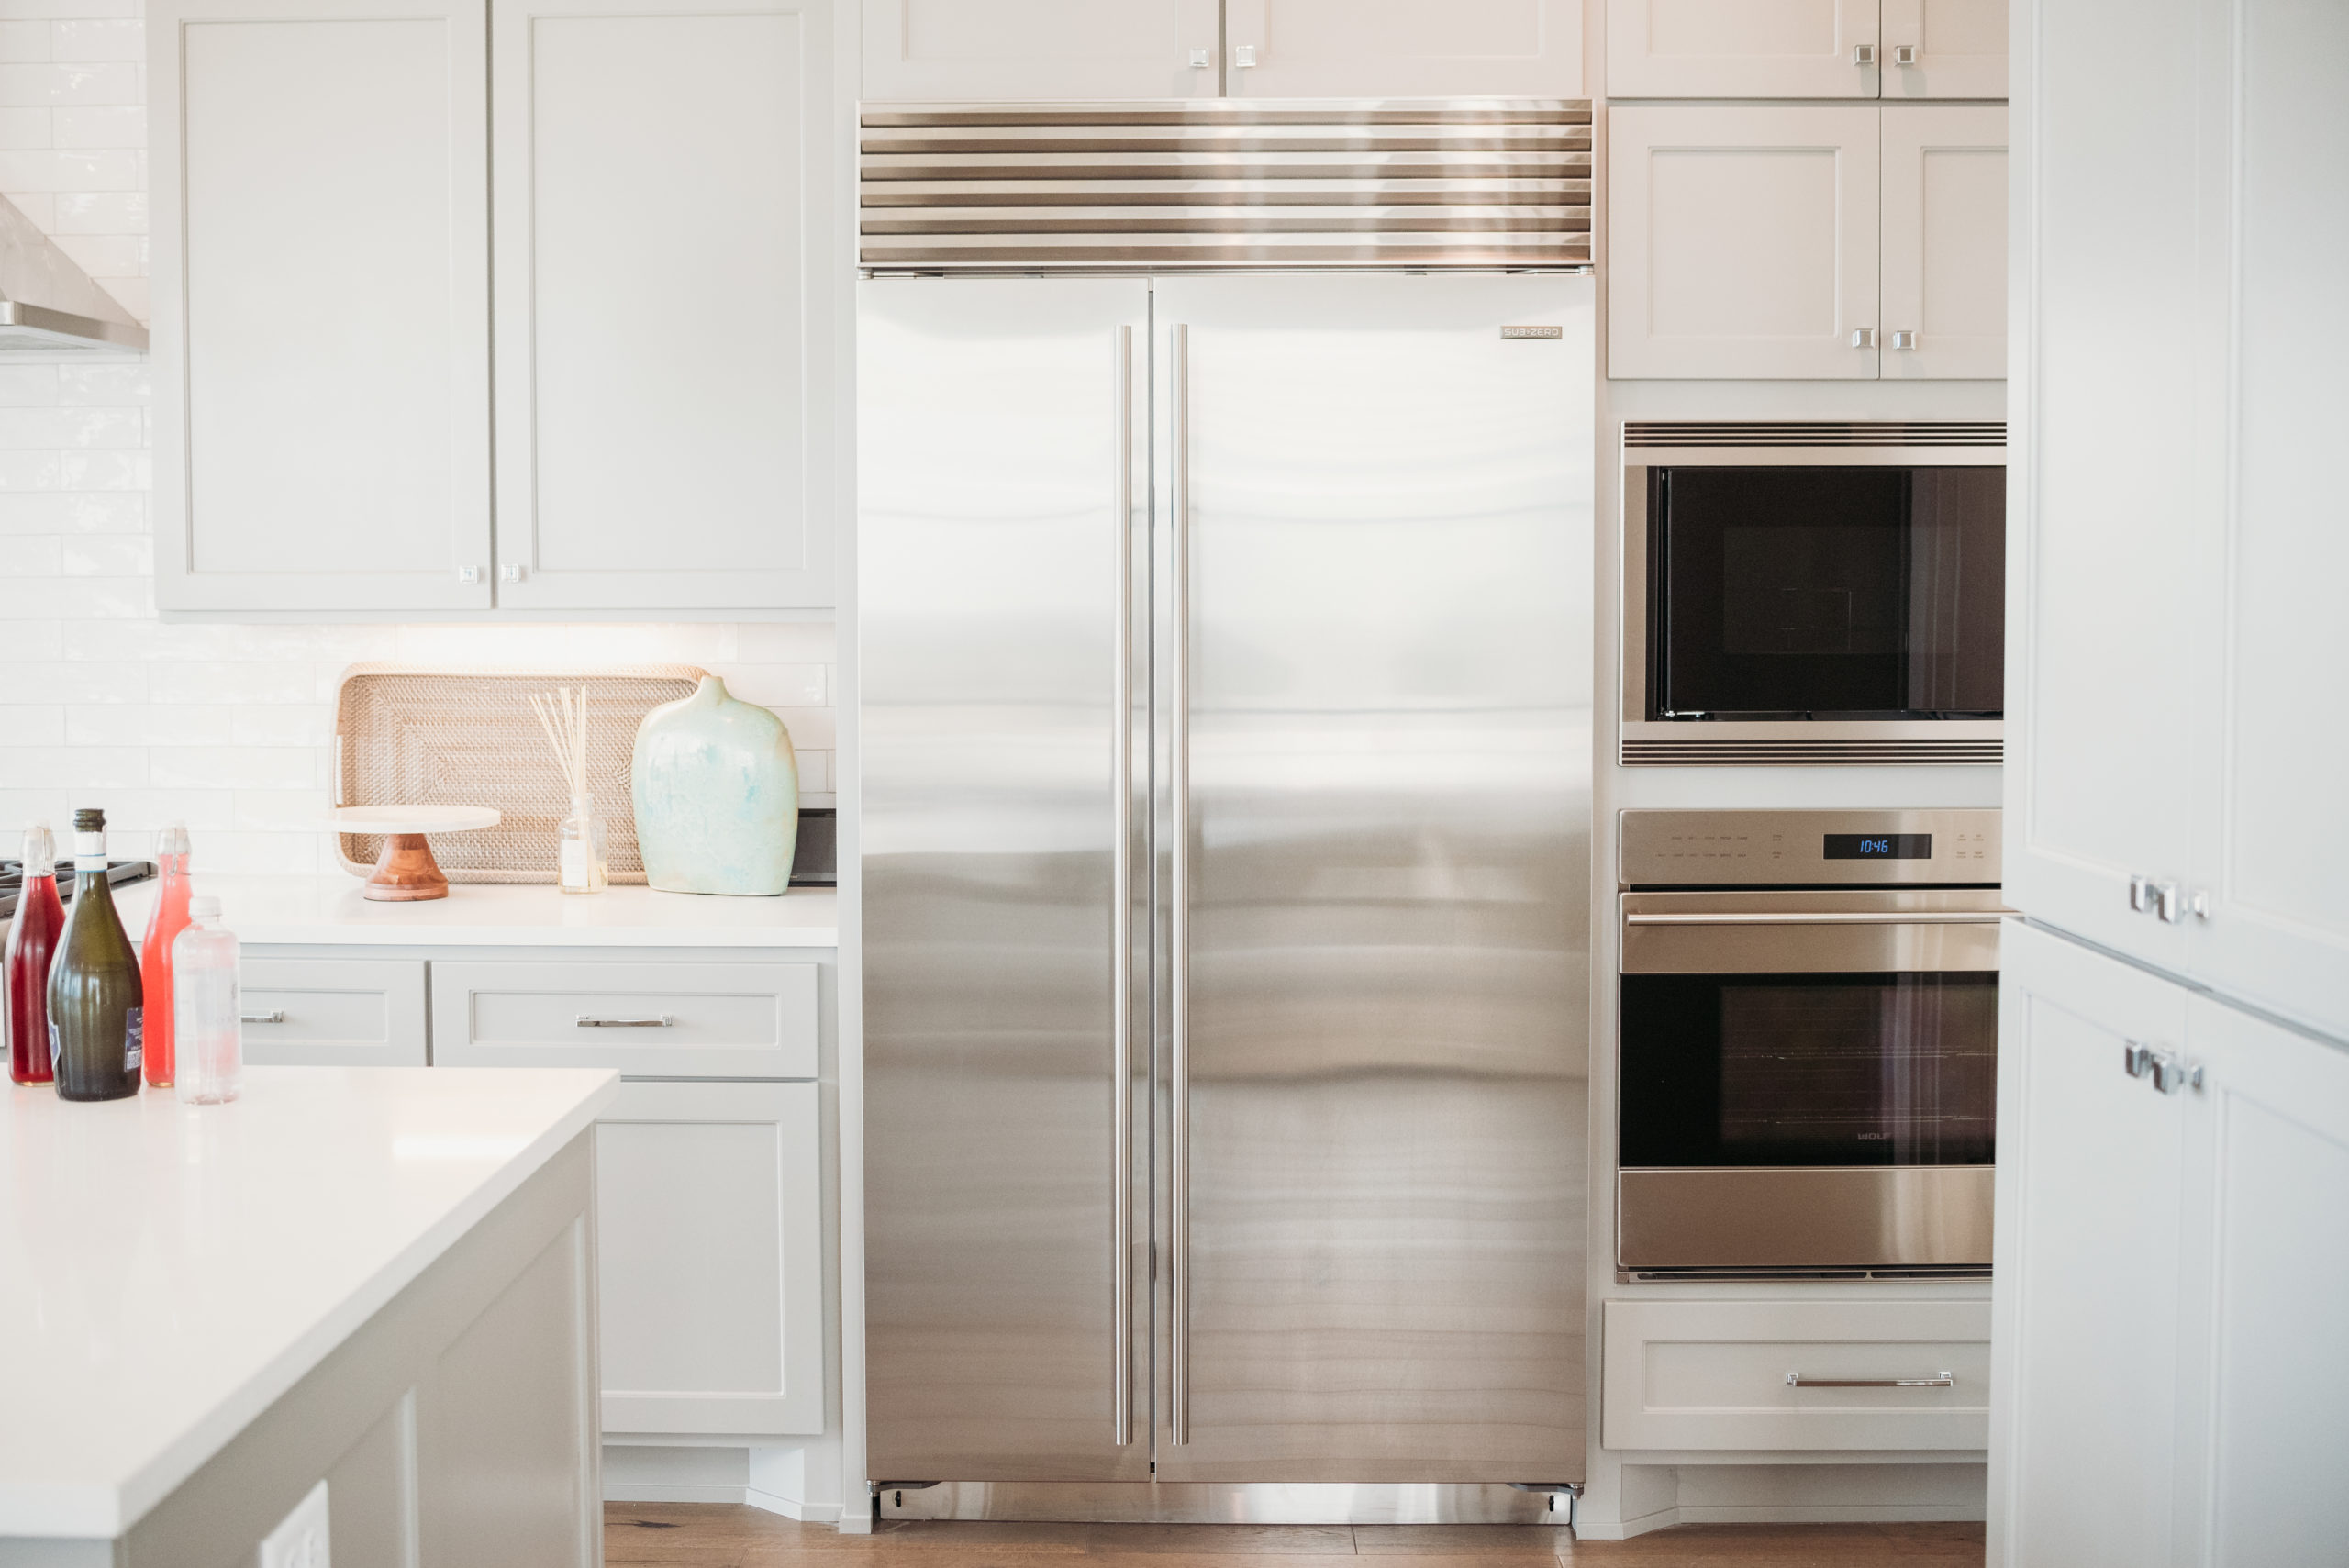 High end stainless steel fridge featured in the Corvalla condos